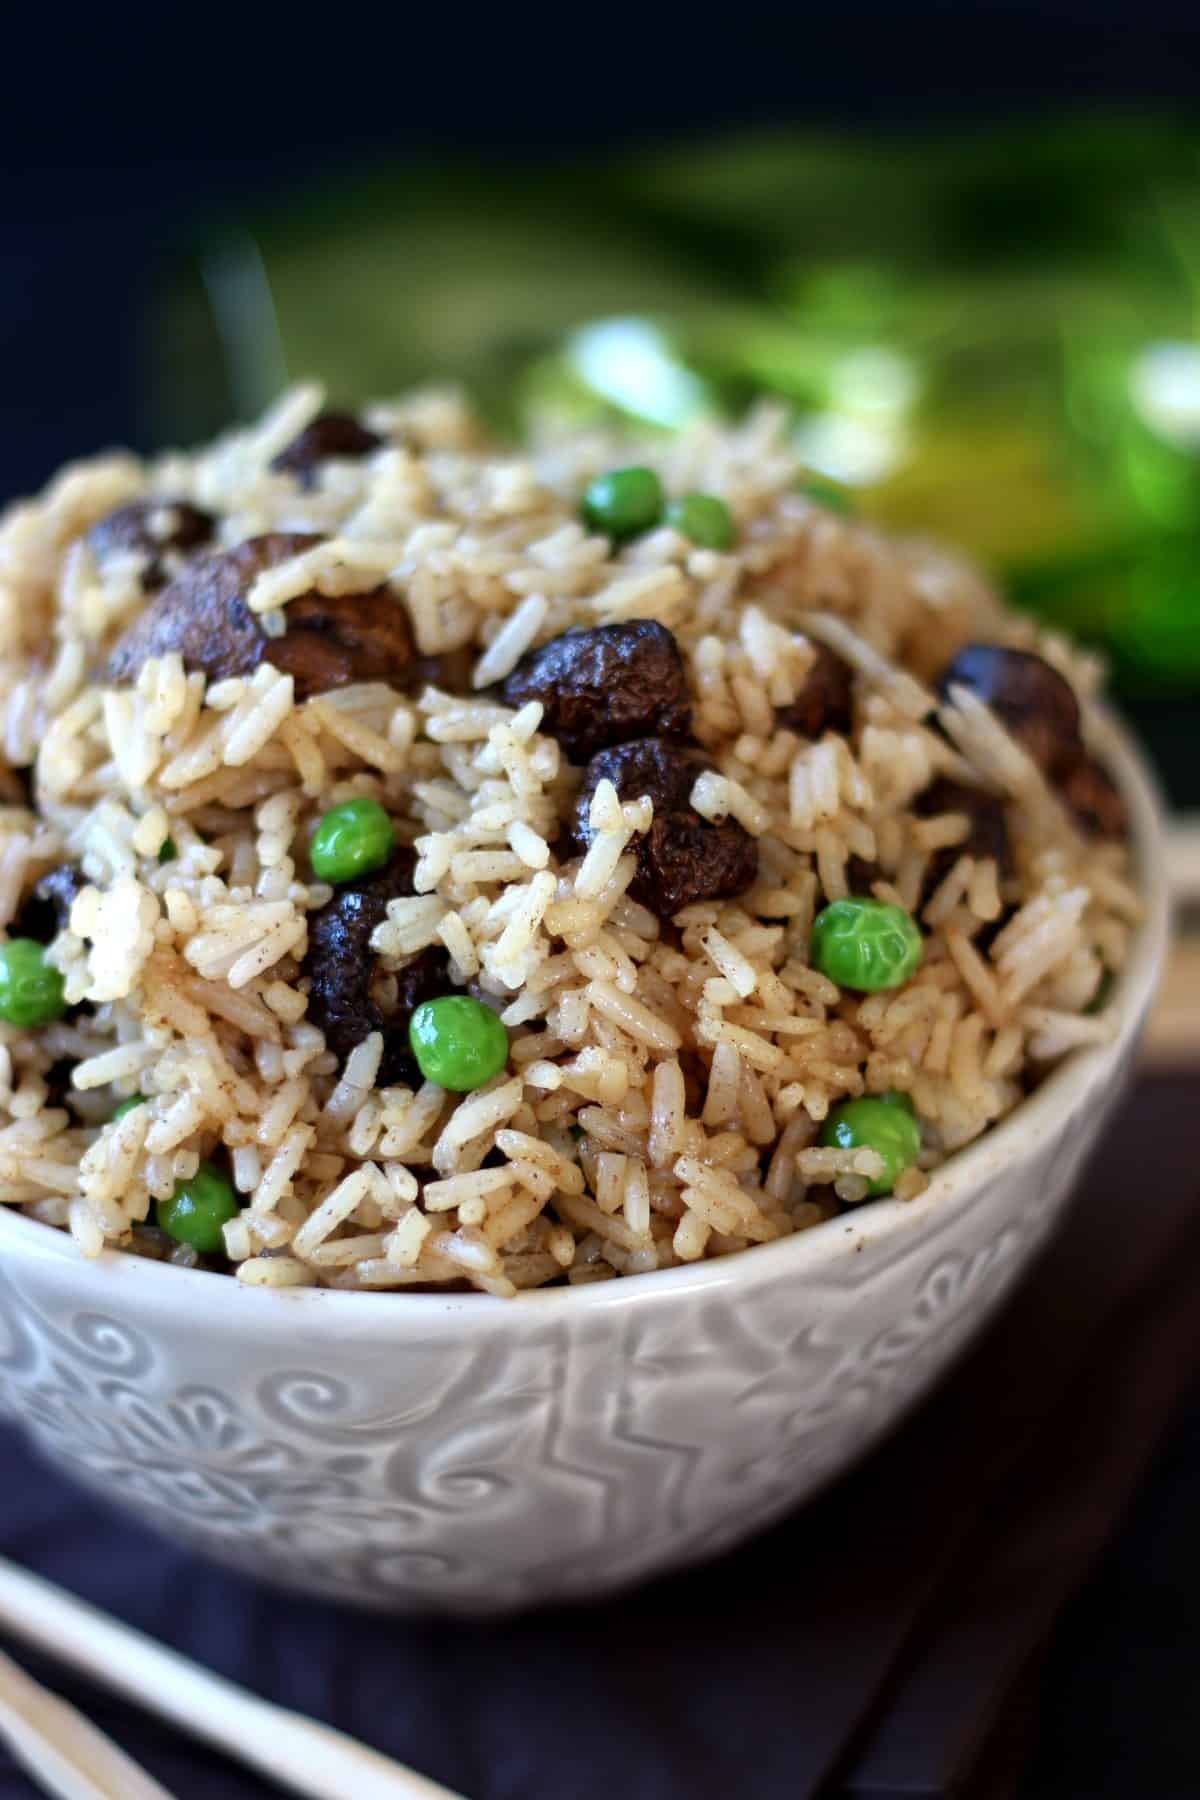 Gorgeous rice with mushrooms and peas is filling a patterned bowl and is tilted towards the camera. A green glass is glimmering in the back.